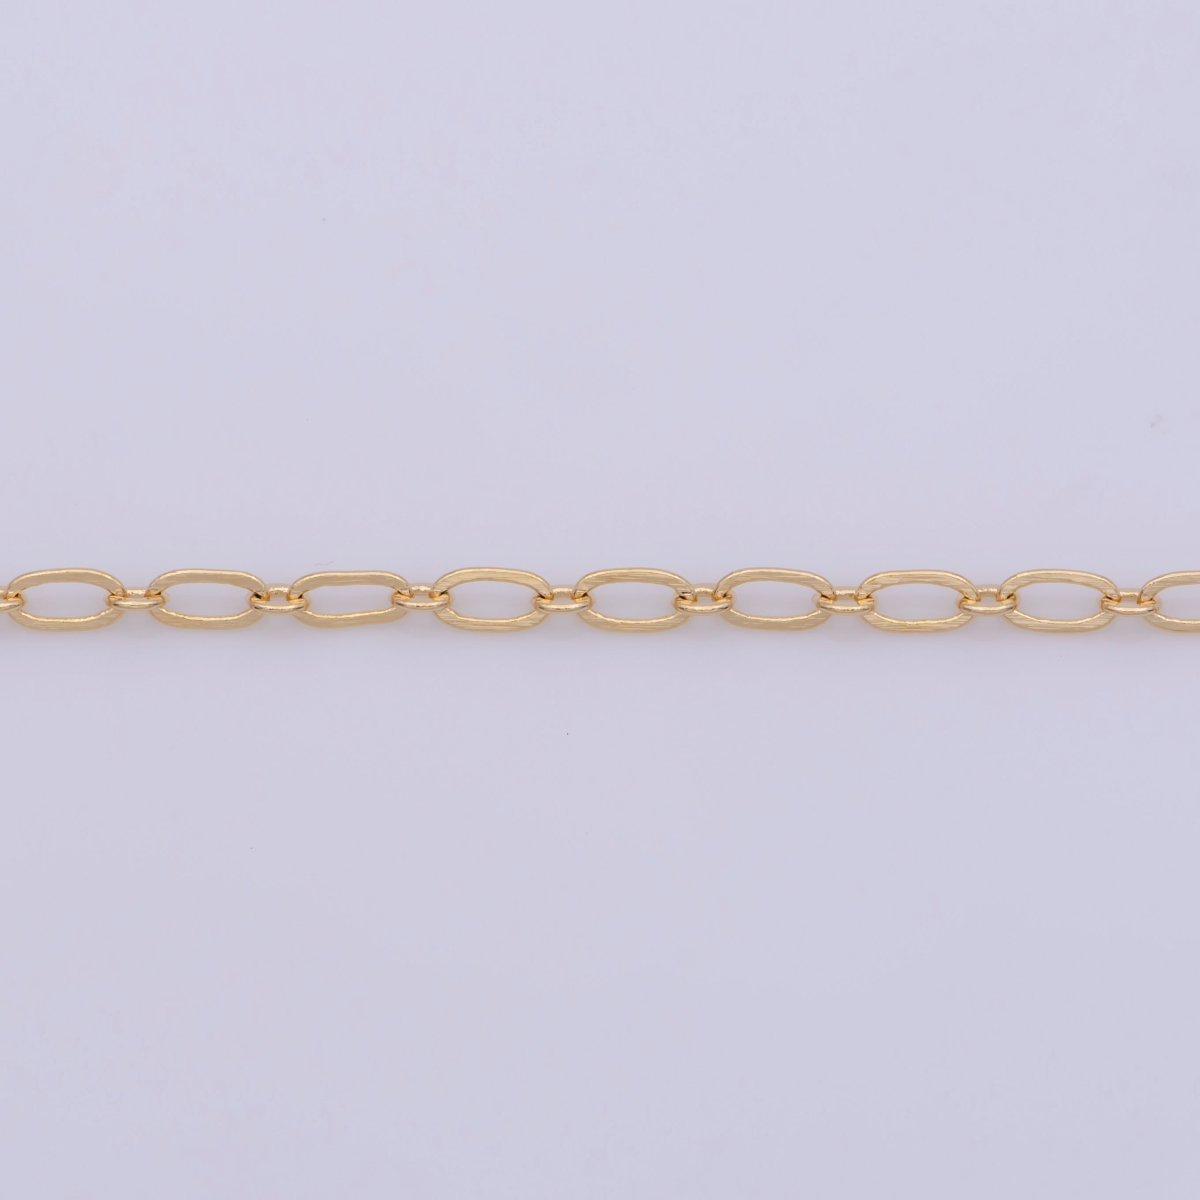 17.5 inch Rolo Chain Necklace, 18K Gold Plated Rolo Finished Chain Necklace For Jewelry Making, Dainty 2.5mm Rolo Necklace w/ Spring Ring | CN-367 - DLUXCA